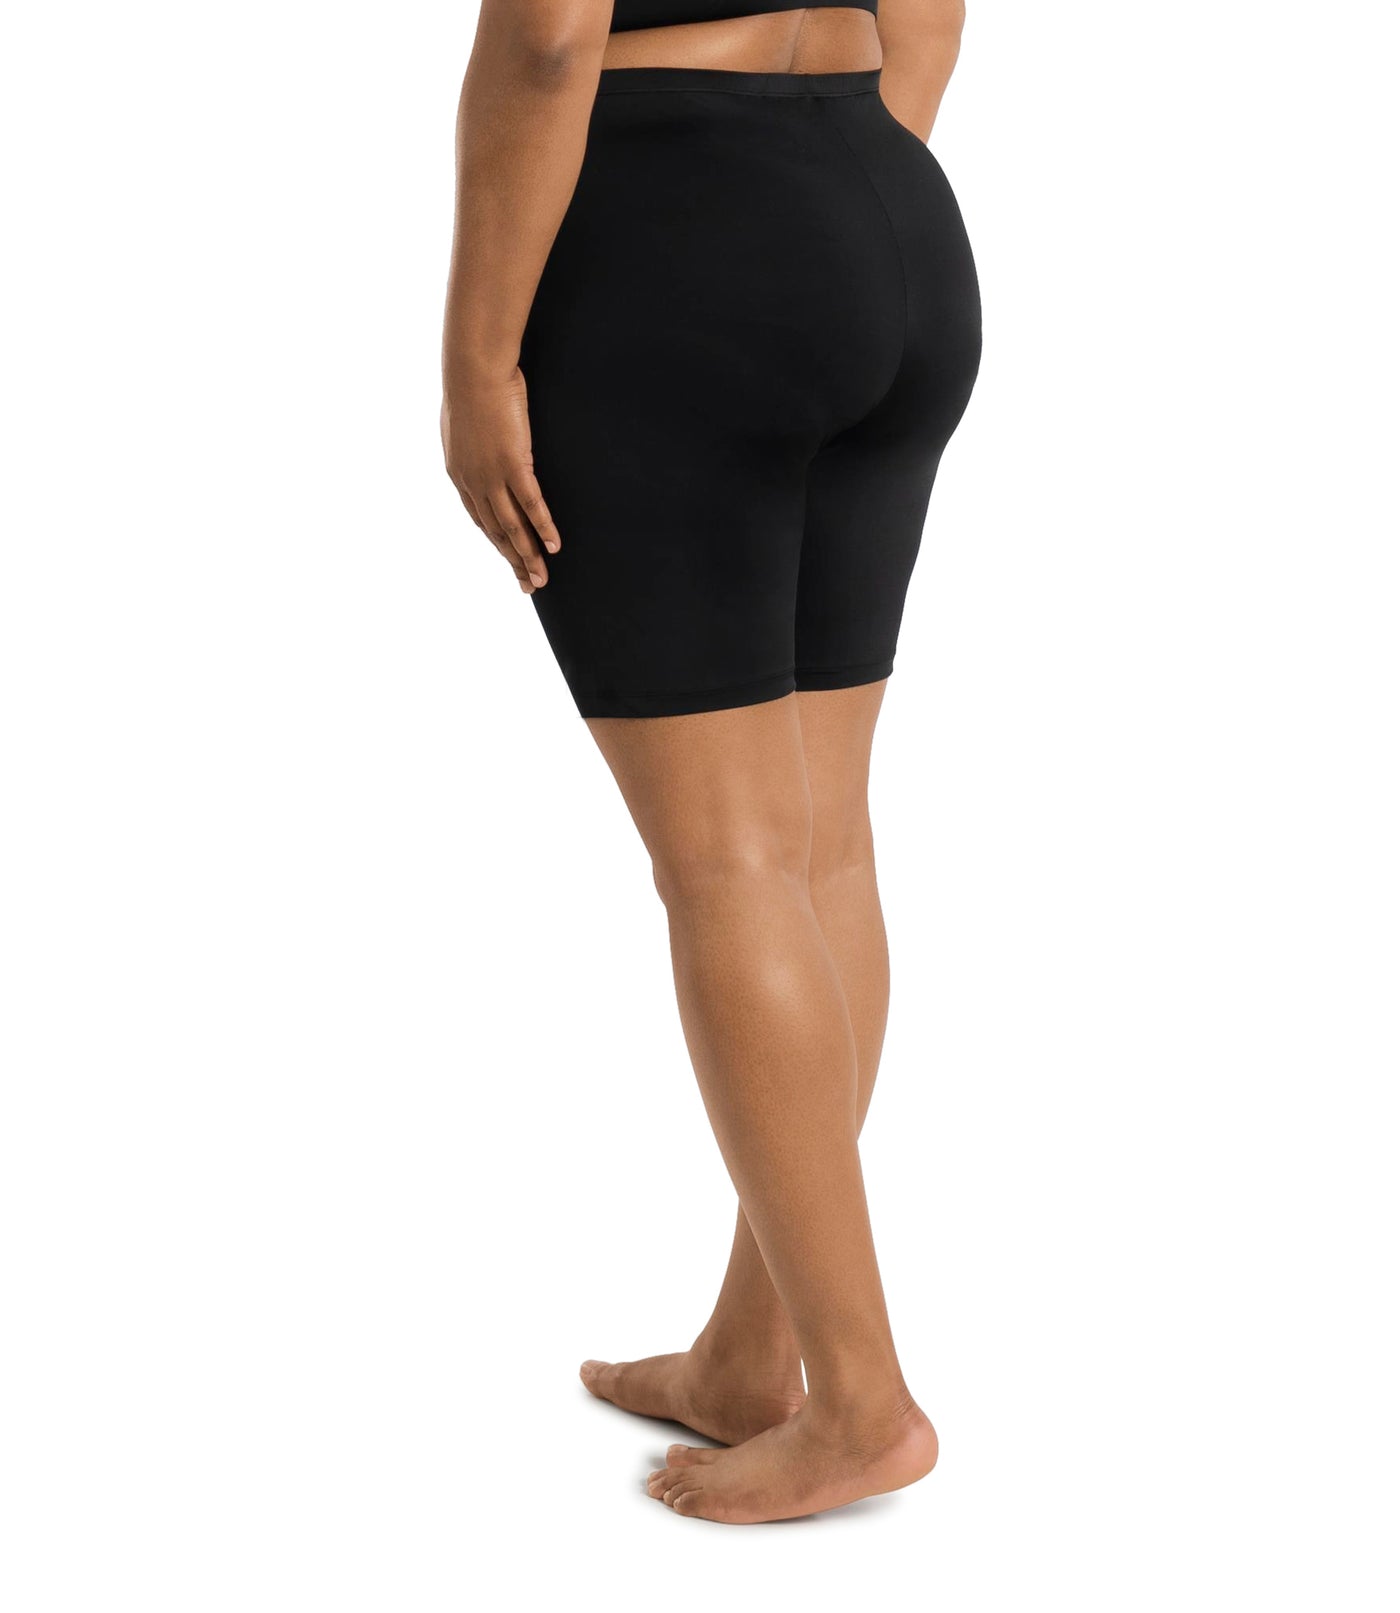 Plus size woman wearing JunoActive's hush full fit boxer in color black. Model is facing back with hands to her side.